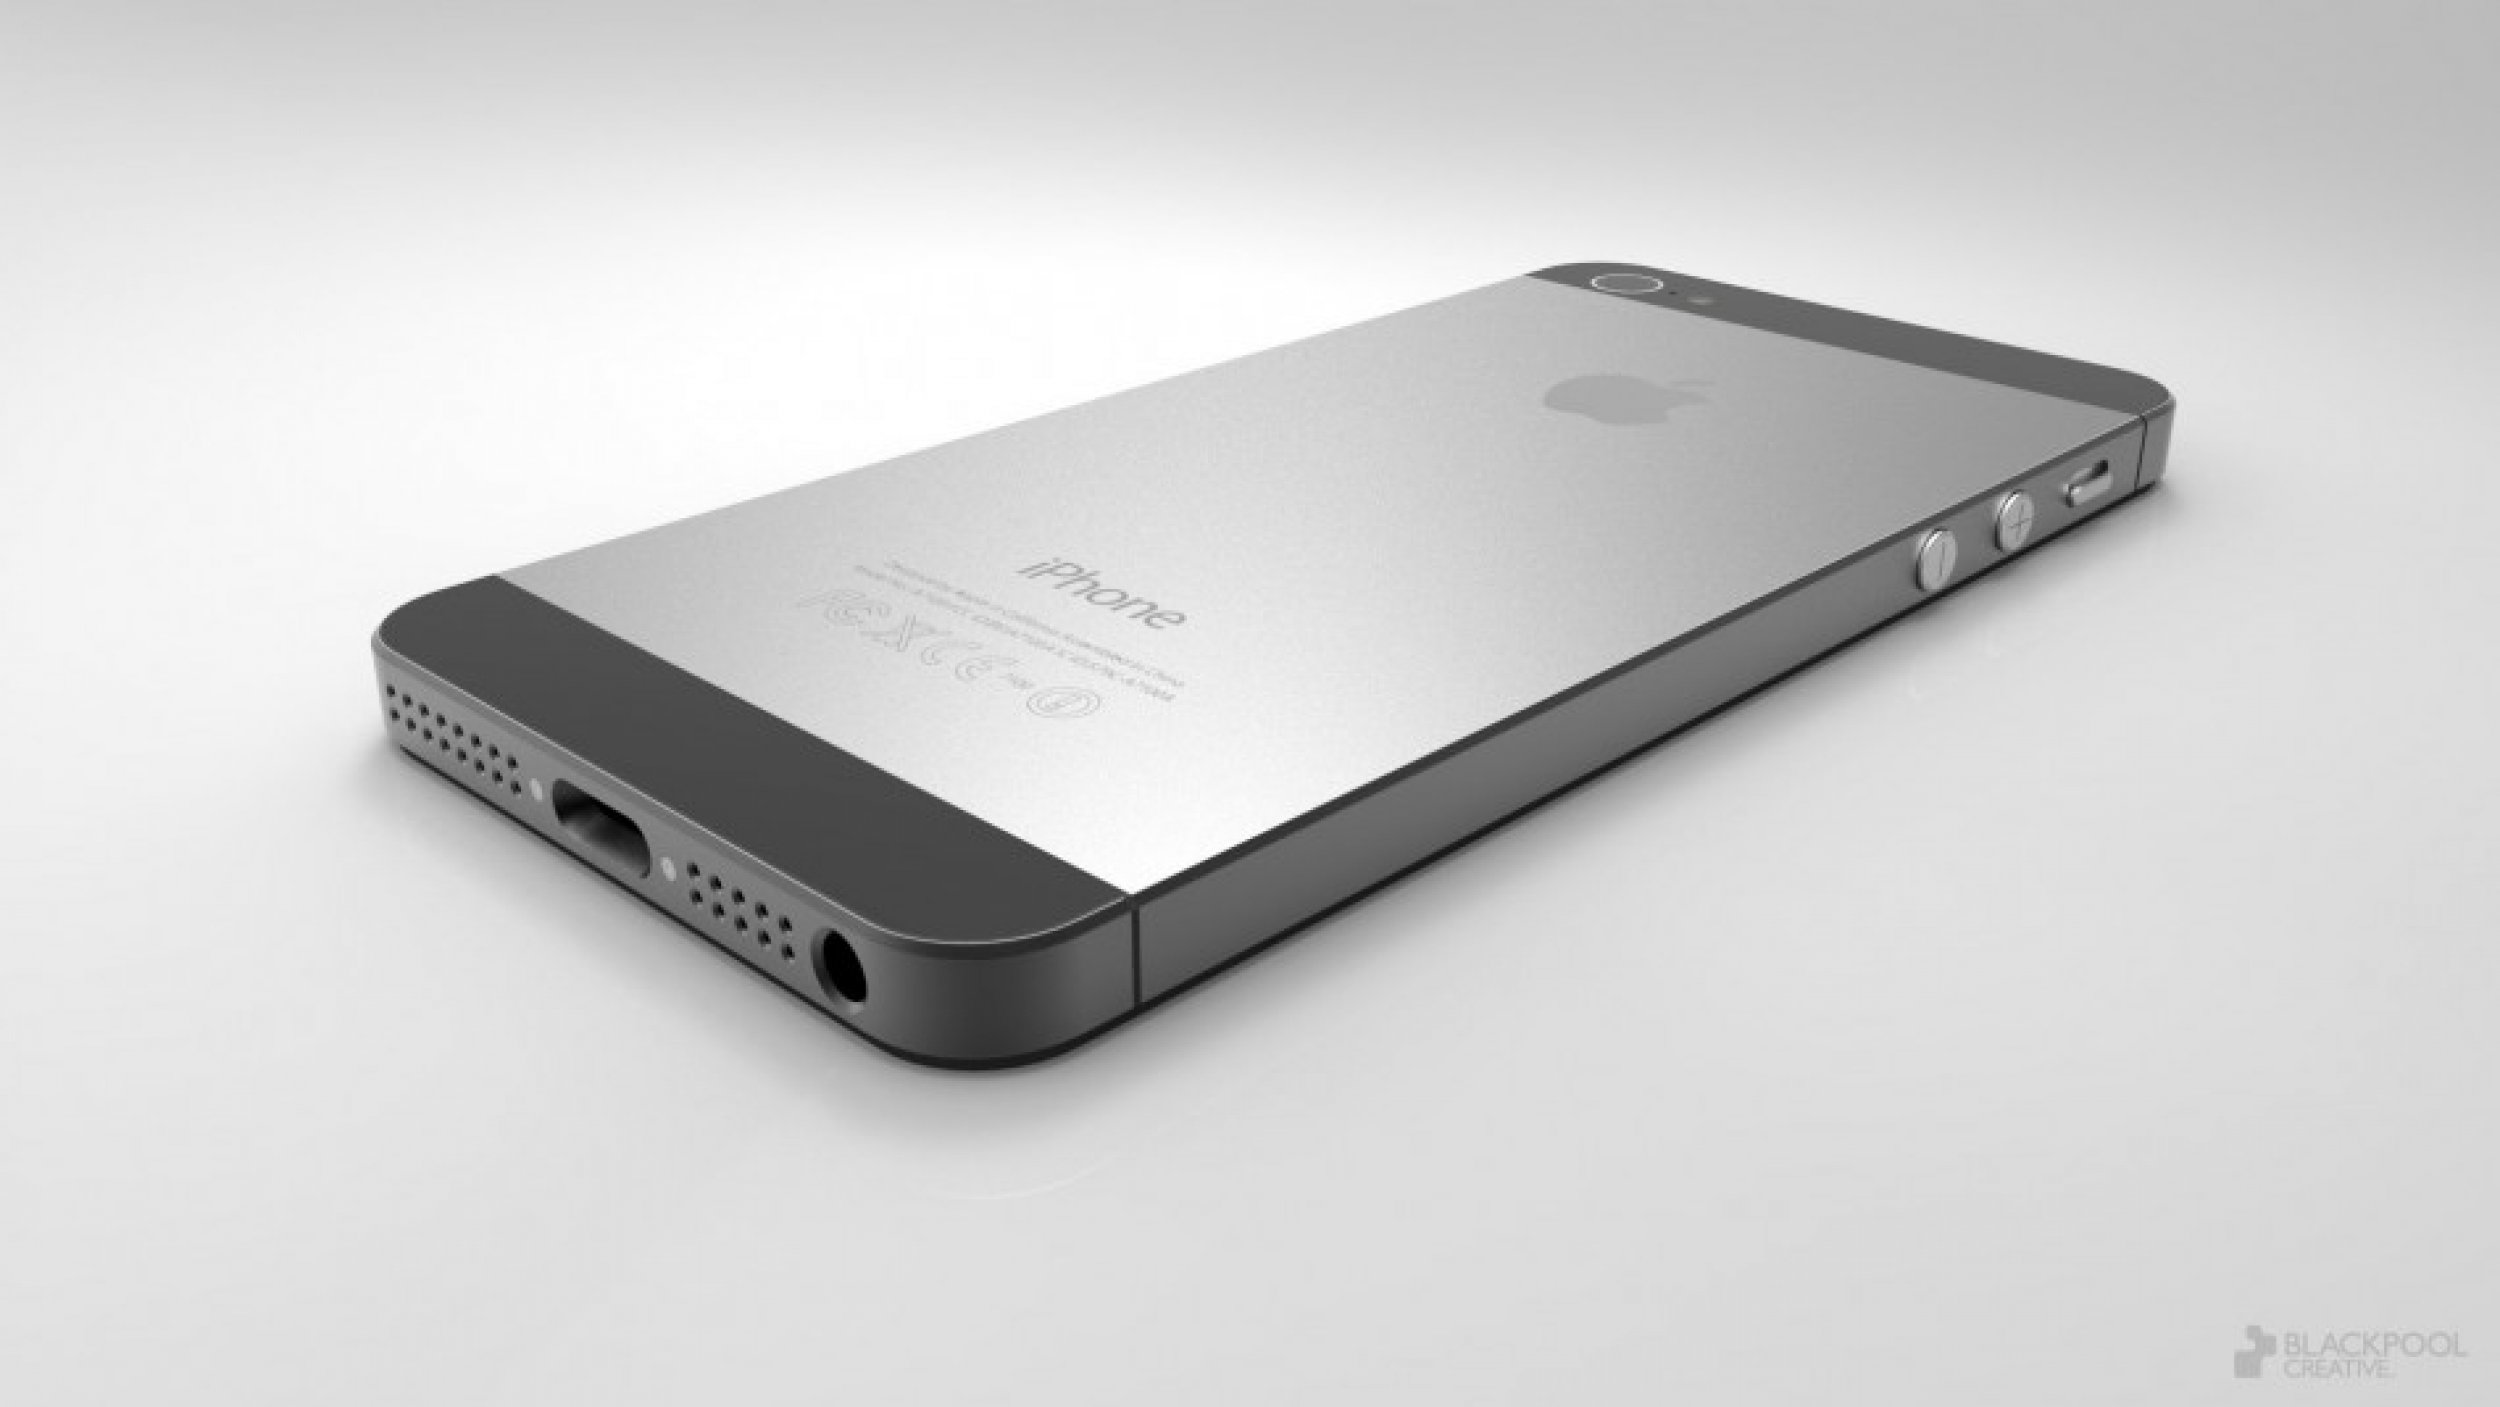 Apple iPhone 5 Confirmed To Feature Mini Dock Connector Which Other Rumors Are True